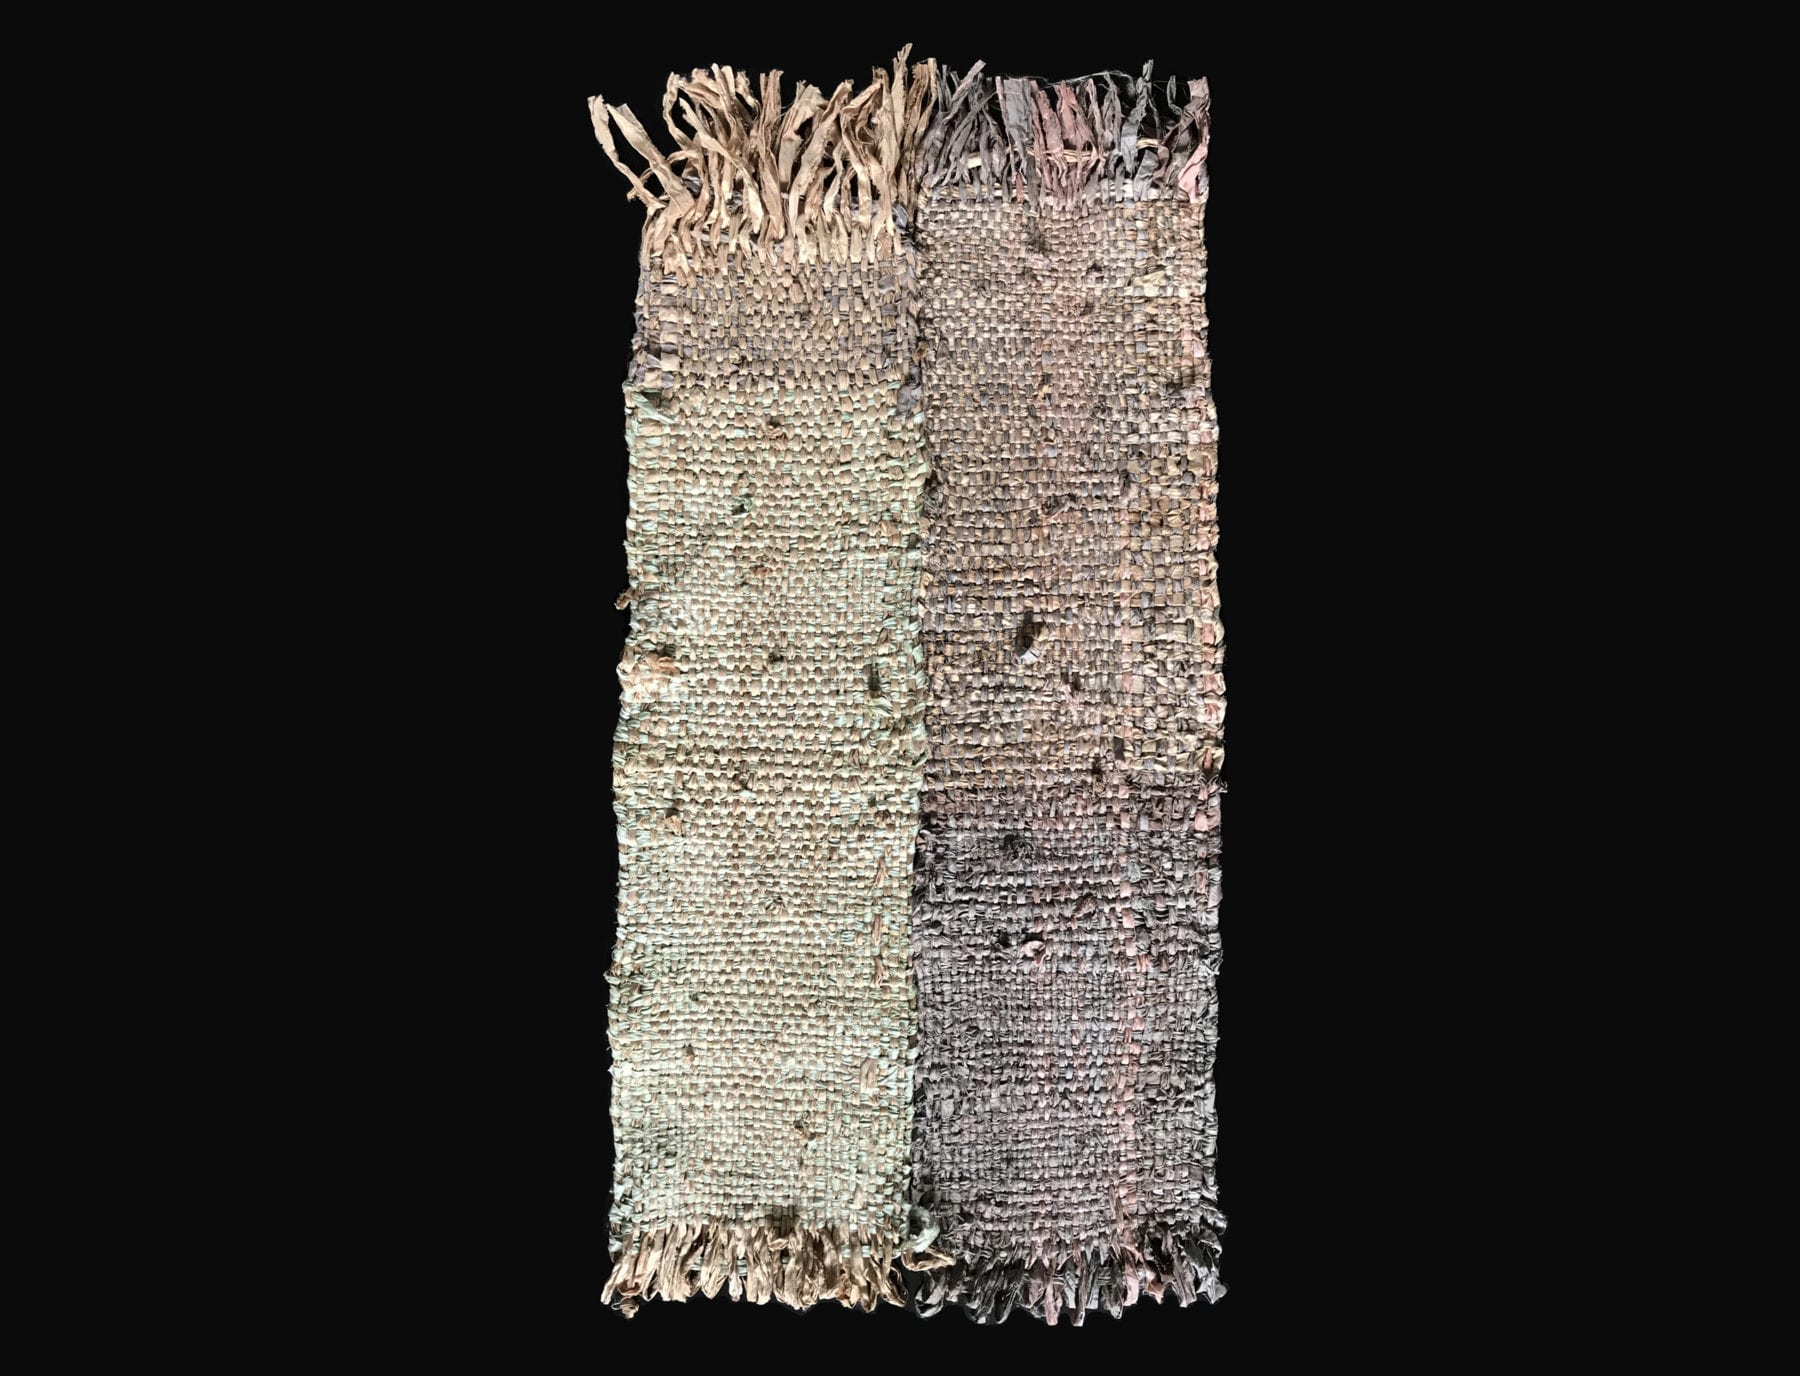 Anubha Sood, Table Cloth Series, recycled sari silk dyed with seagrasses and onion skins, 24 x 36 inches